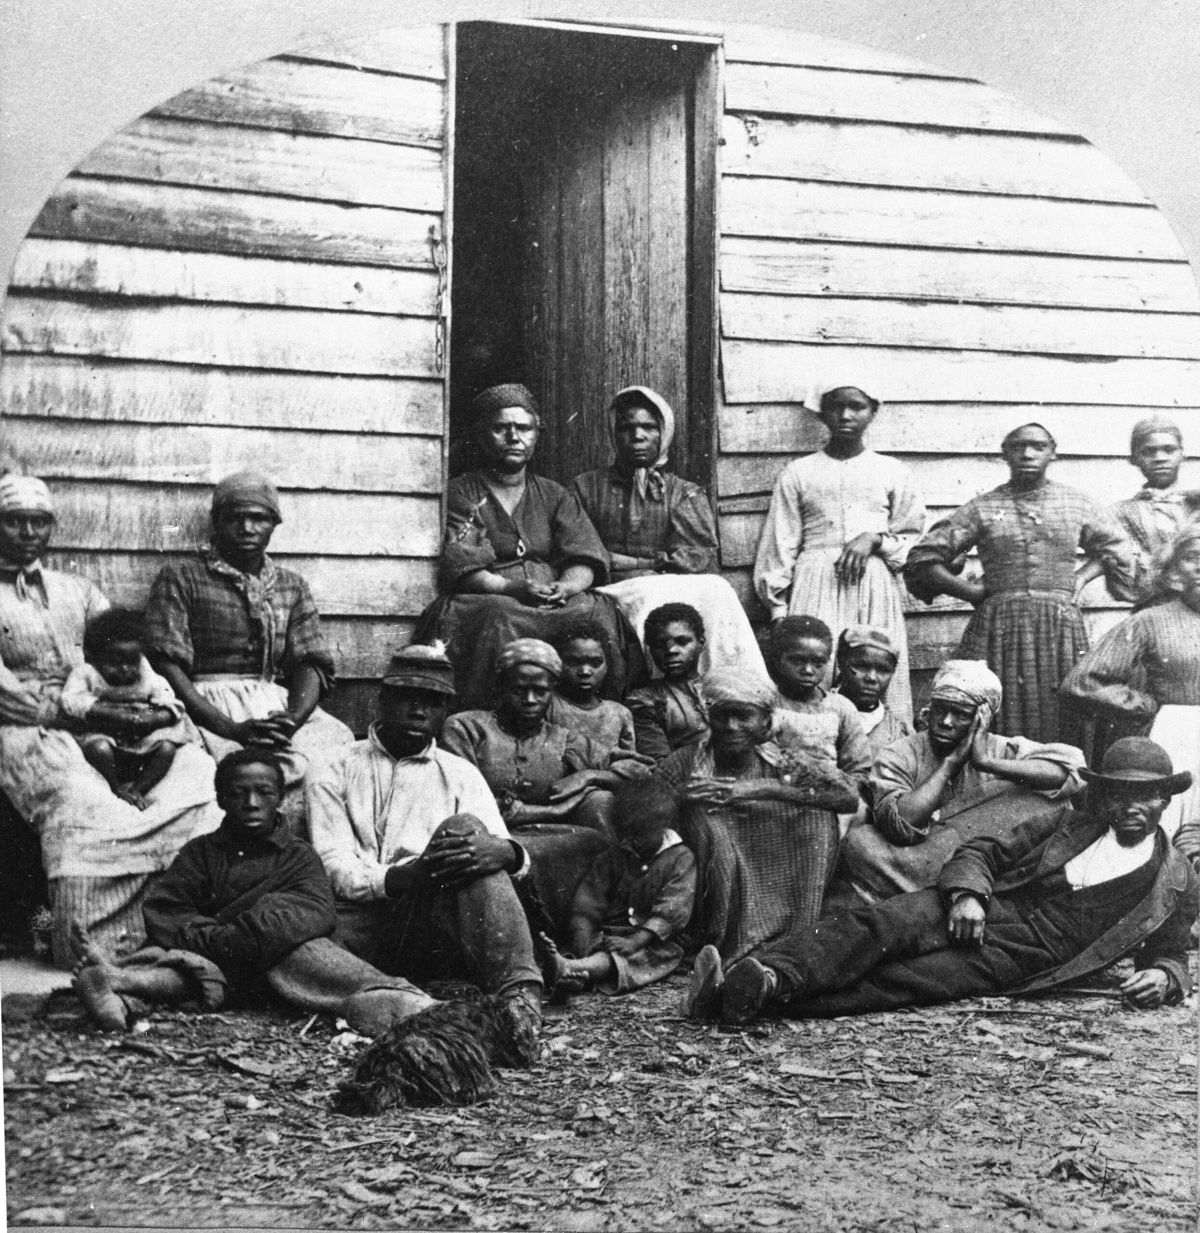 <i>Hulton Archive/Getty Images</i><br/>A portrait of Civil War-era fugitive slaves who were emancipated upon reaching the North in the mid-1860s are seen.